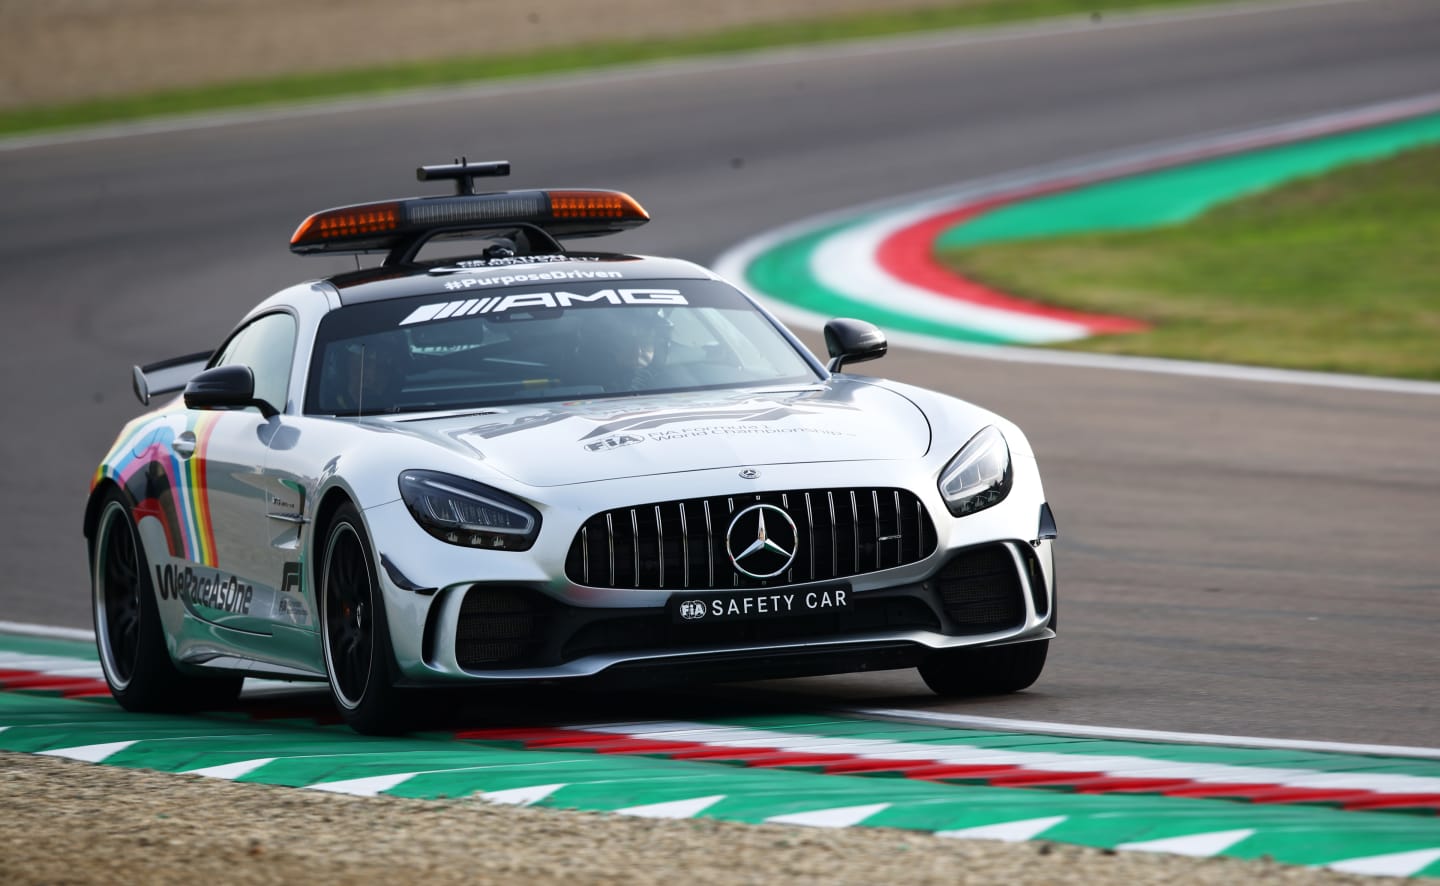 IMOLA, ITALY - NOVEMBER 01: The FIA Safety car is seen on track during the F1 Grand Prix of Emilia